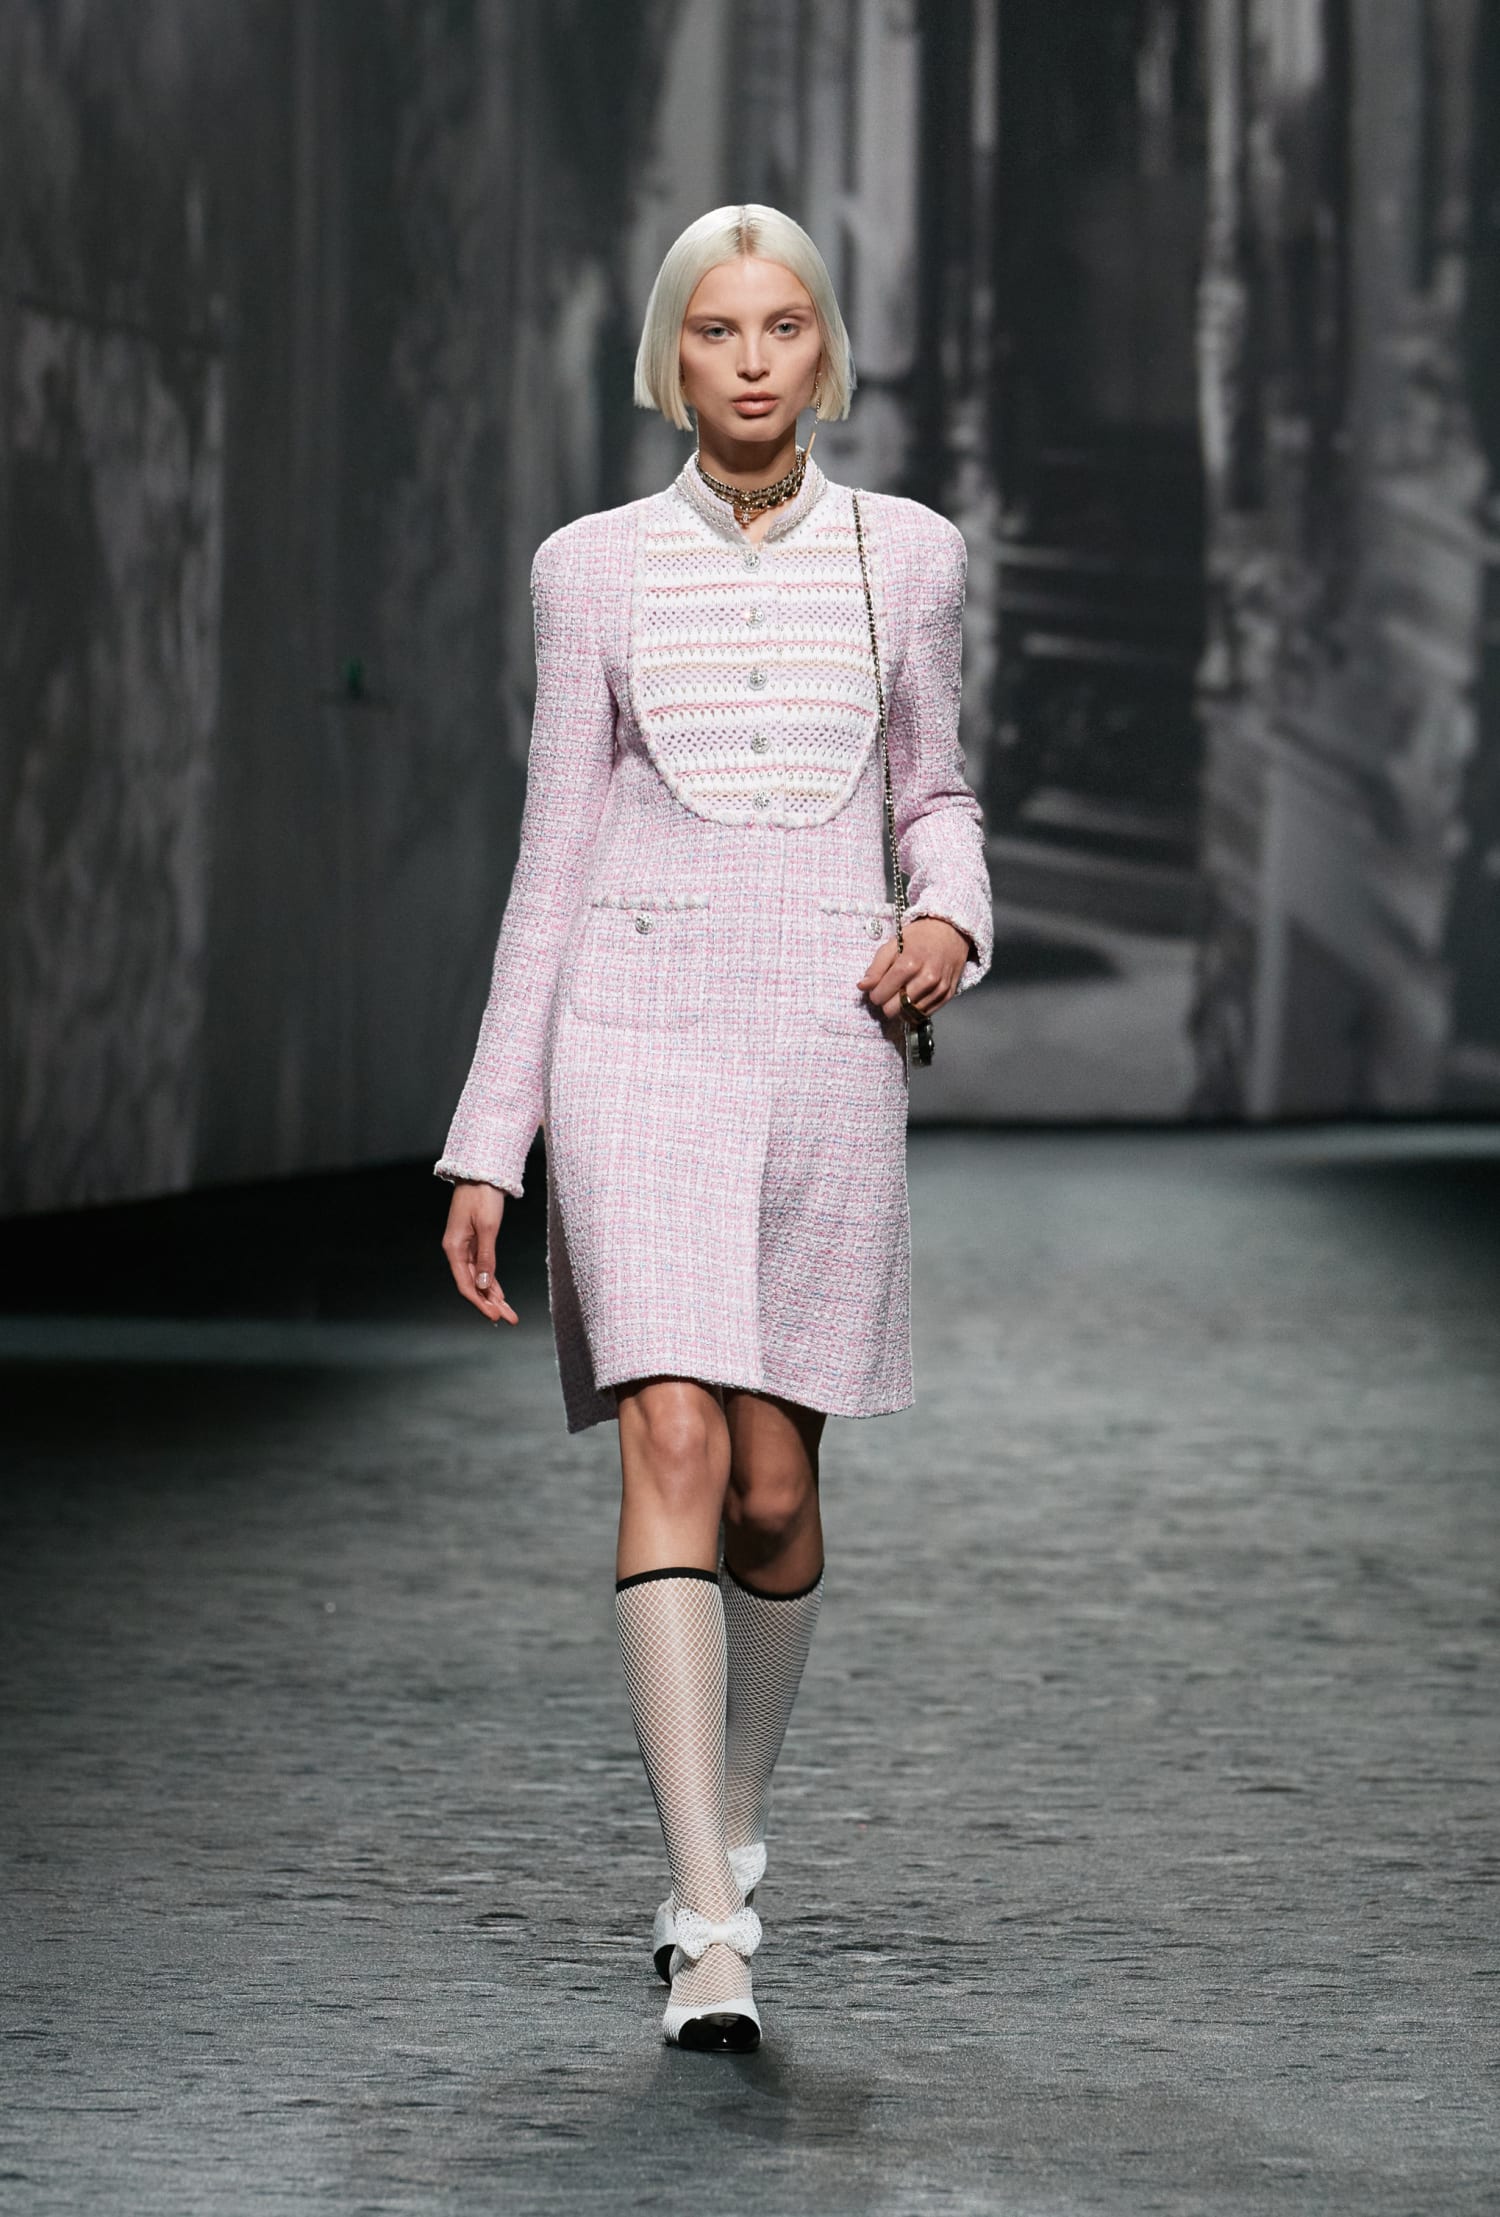 Chanel Spring Summer 2023 Ready-to-Wear - RUNWAY MAGAZINE ® Official